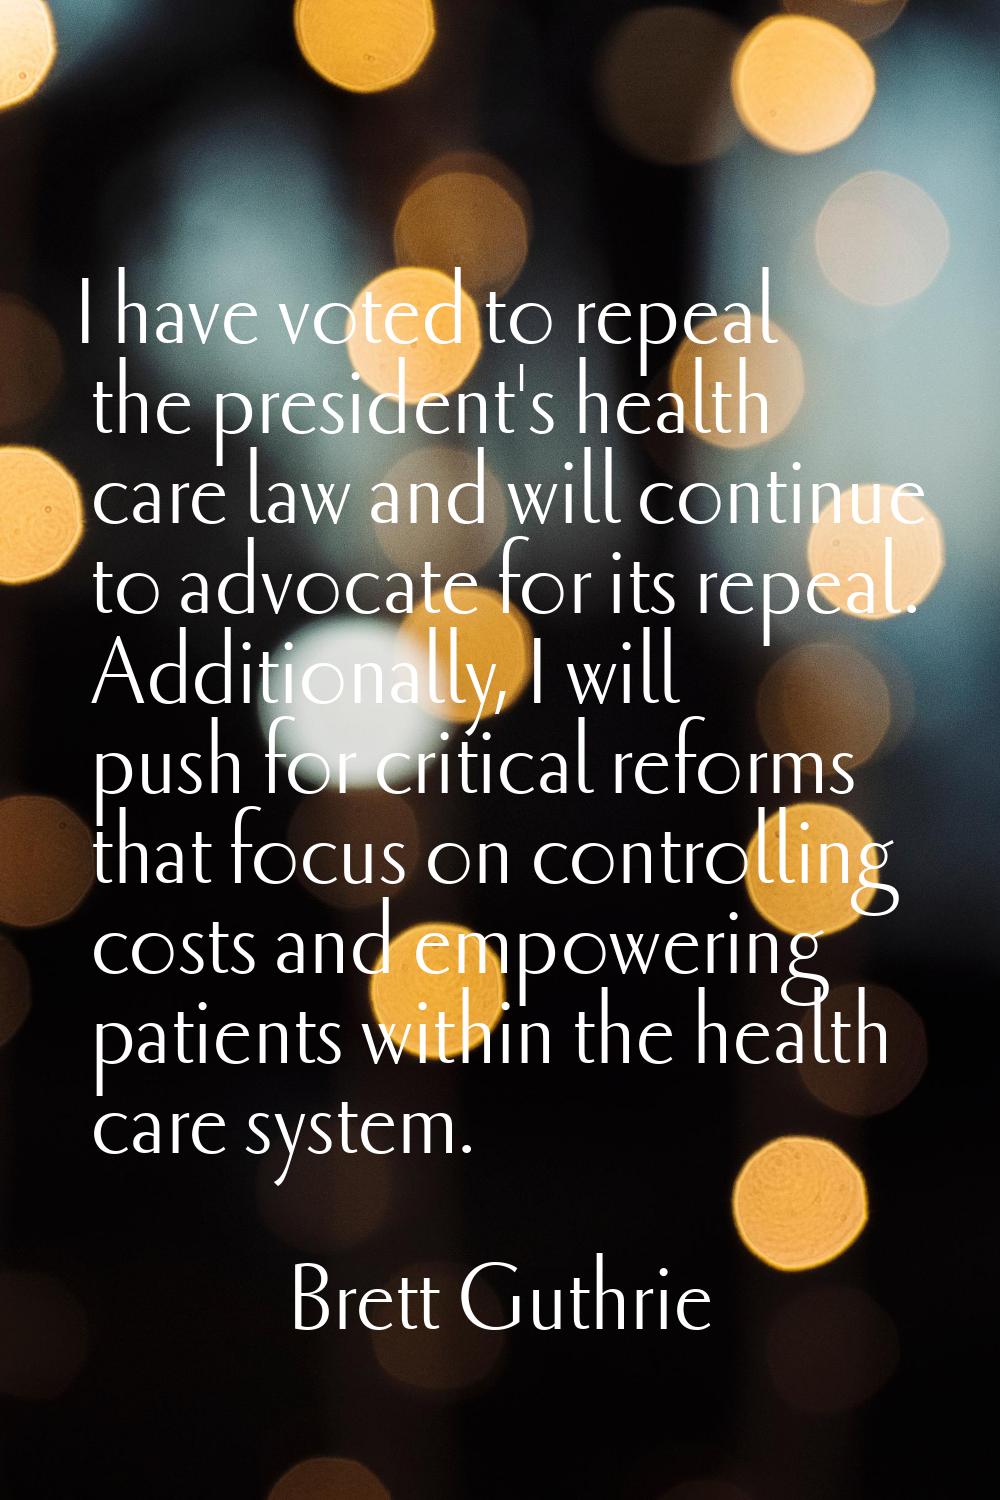 I have voted to repeal the president's health care law and will continue to advocate for its repeal